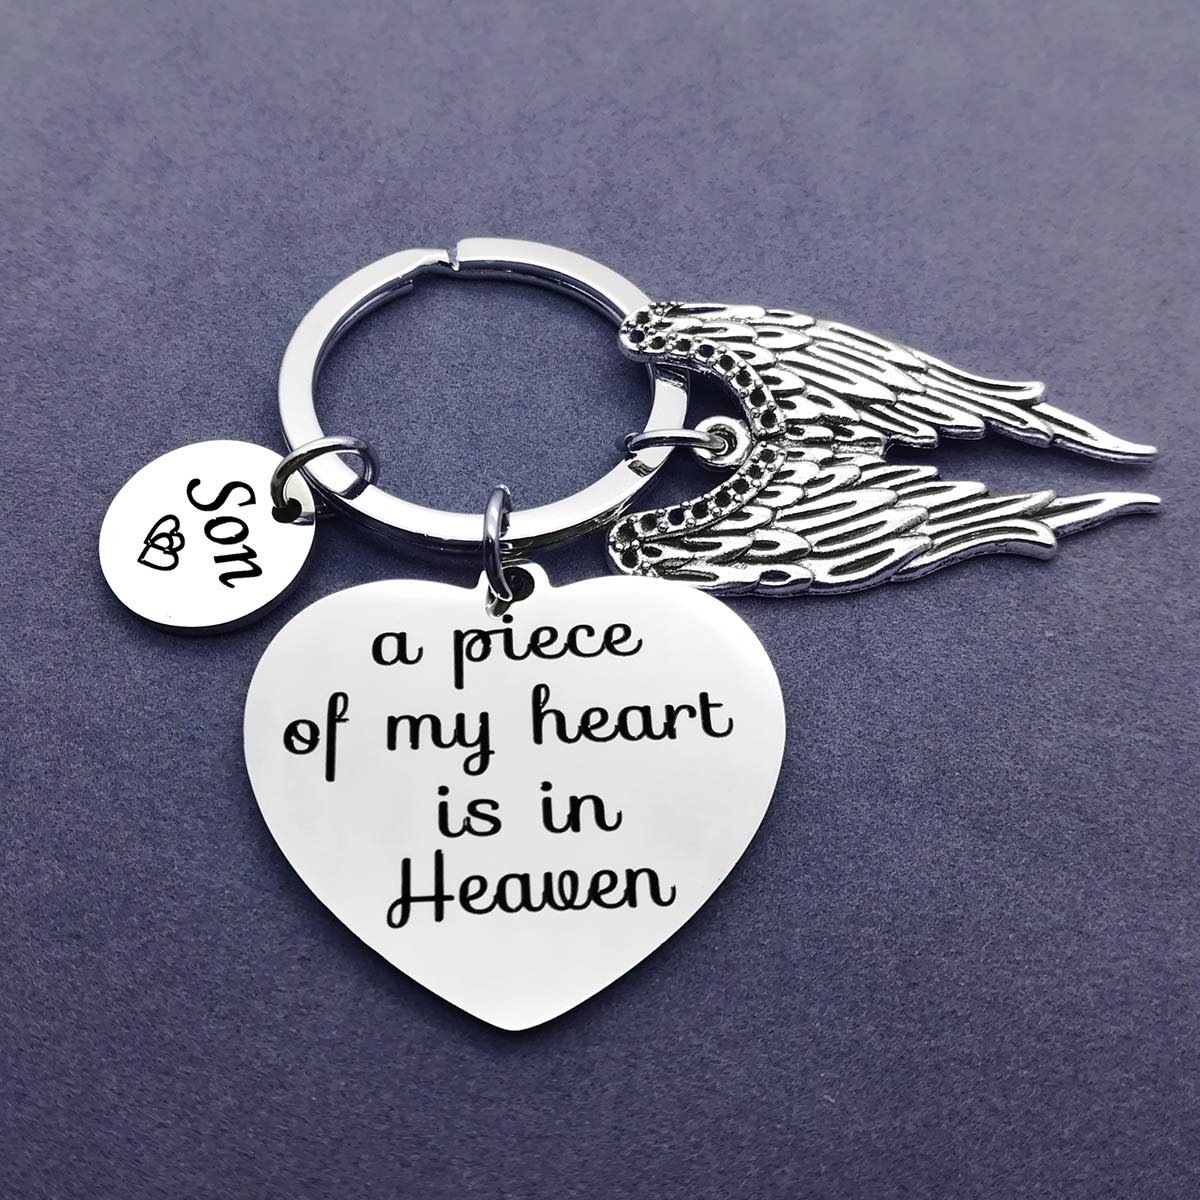 Loss Memorial Keychain A Piece of My Heart Is in Heaven Son Memorial Jewelry Memorial Gift Miscarriage Remembrance Gift Loss of Loved One Keychain Sympathy Gift for Infant Loss